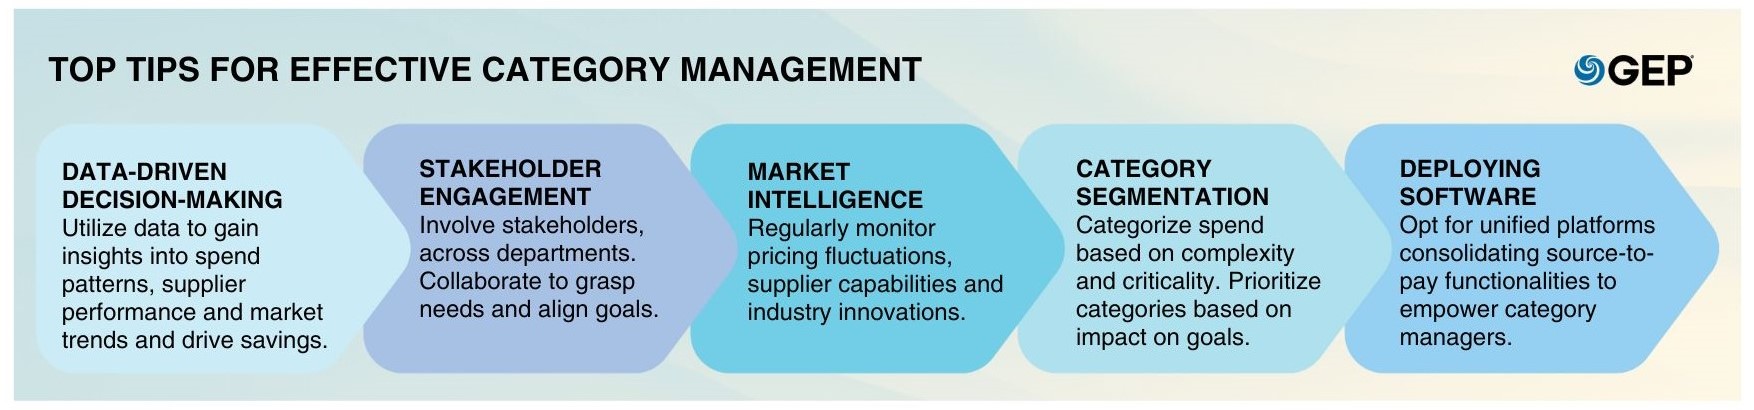 10-ways-category-management-drives-growth